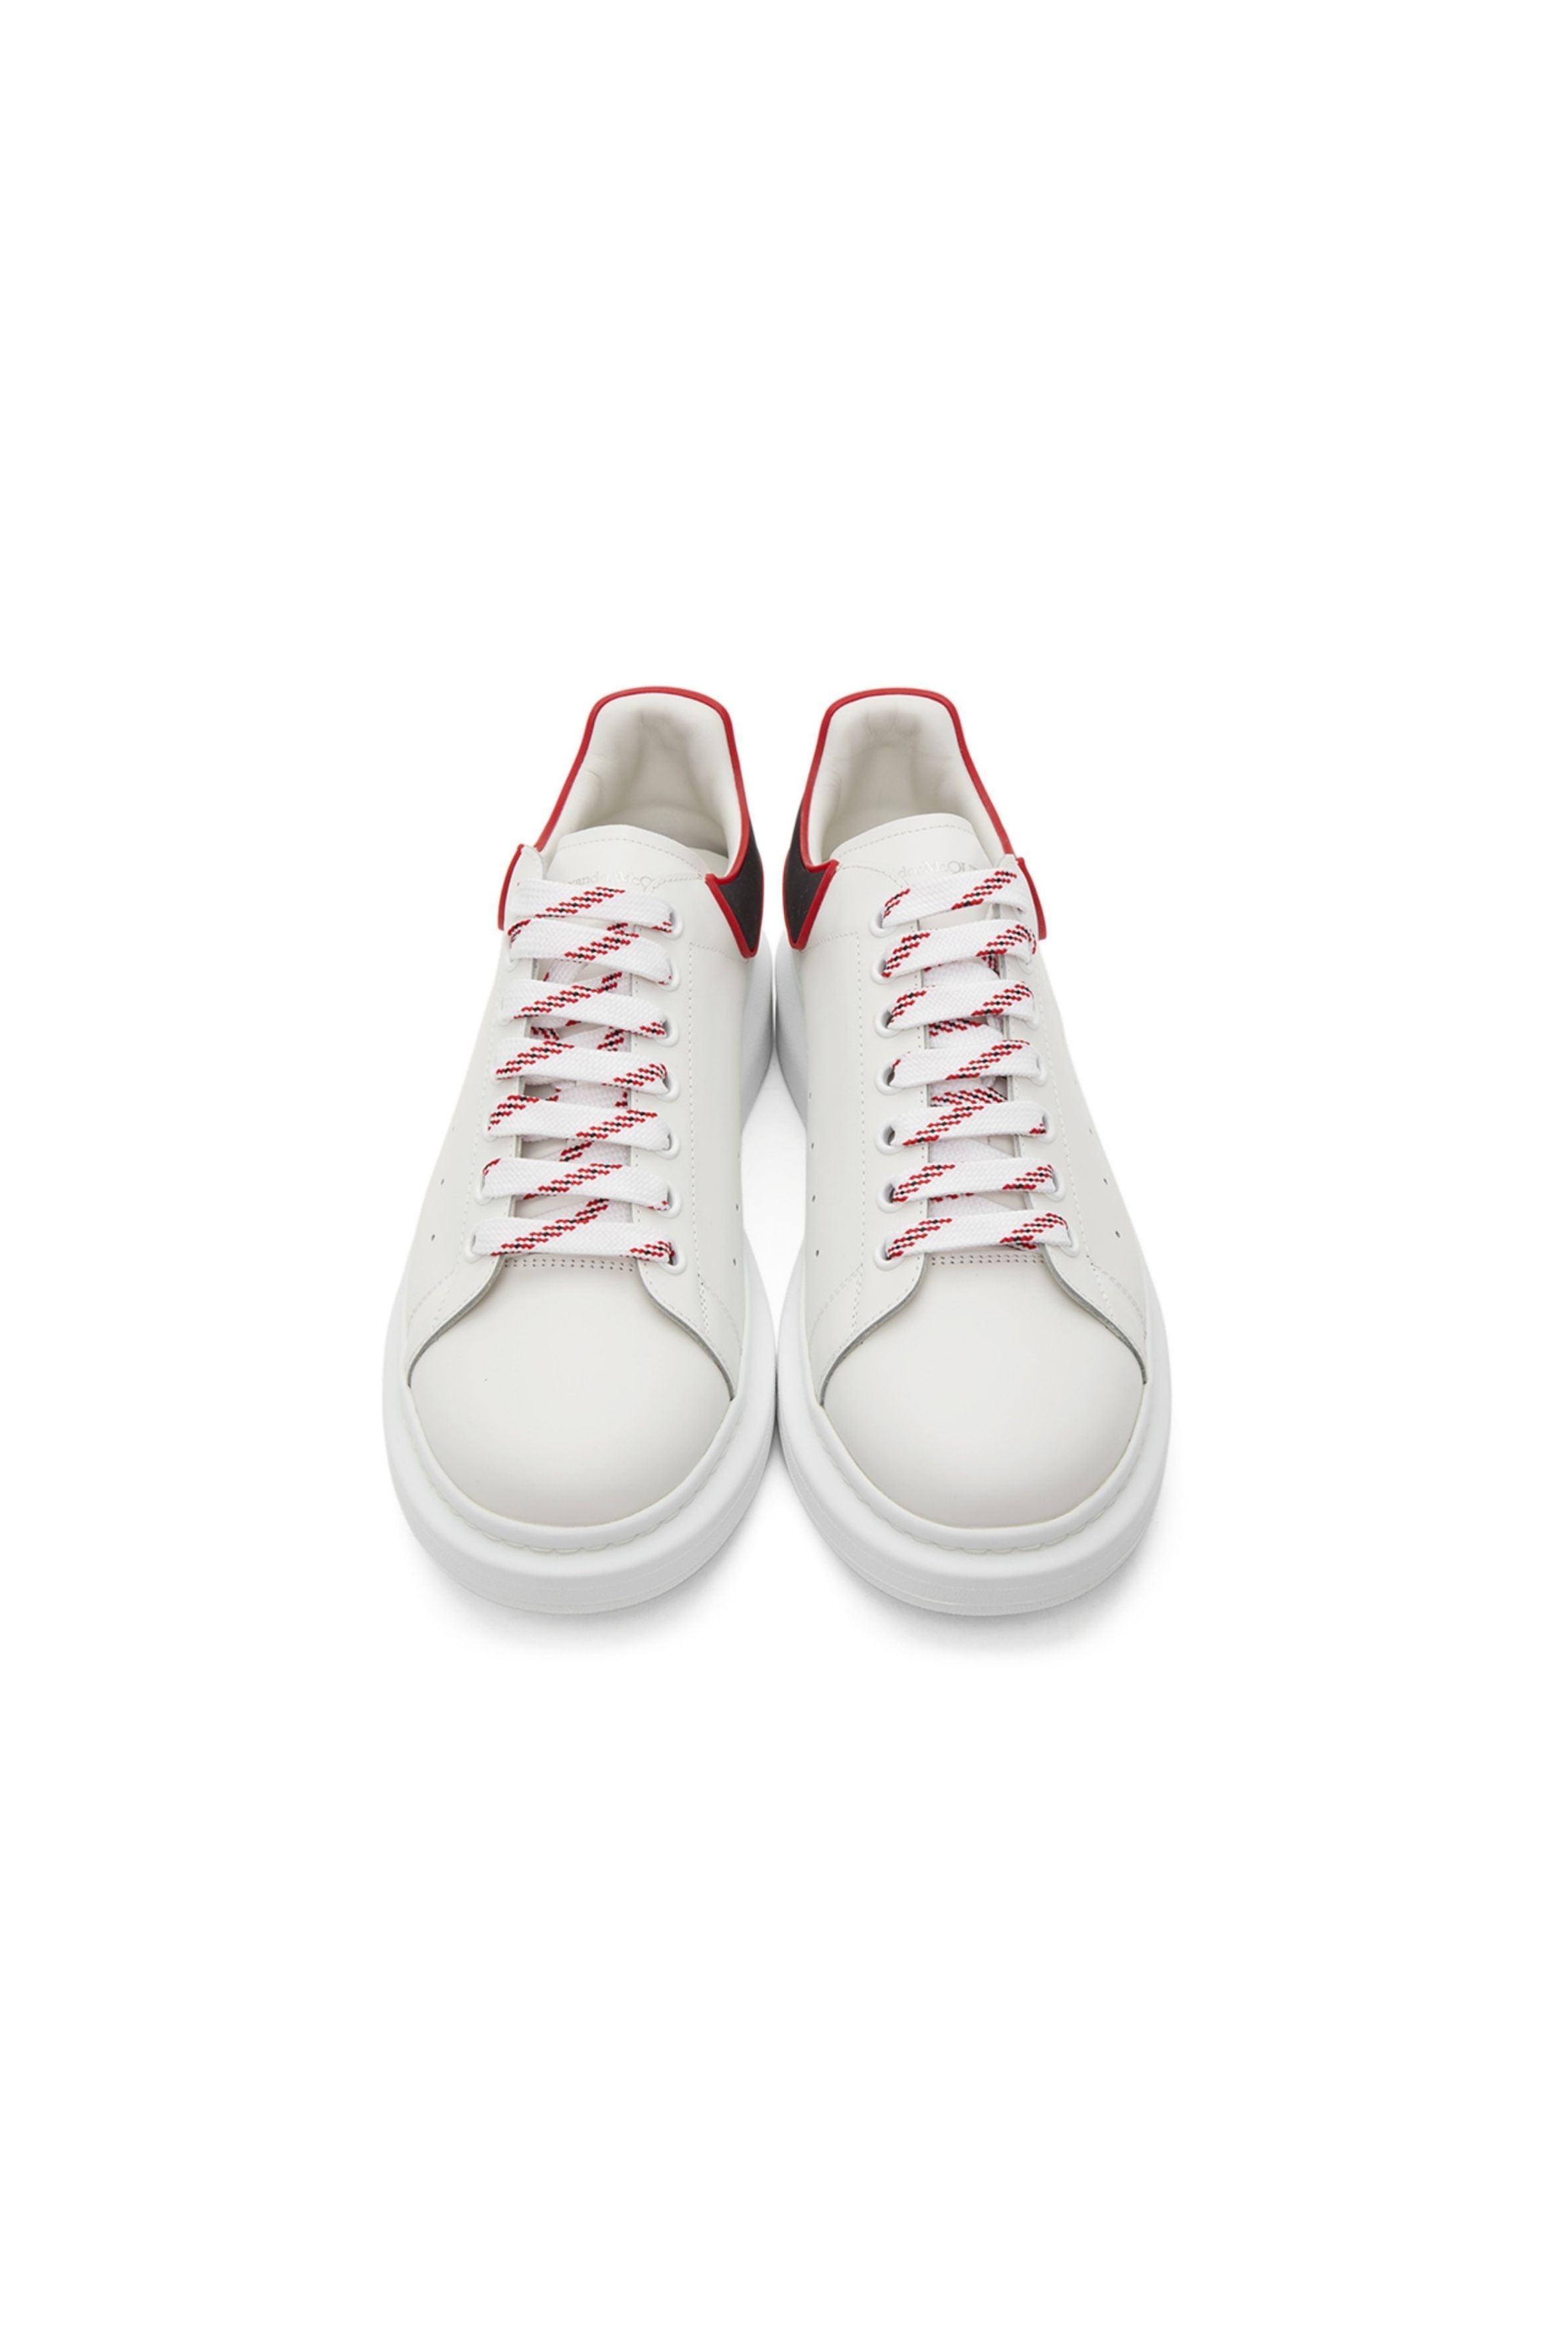 Alexander Mcqueens White & Red Oversized Sneakers